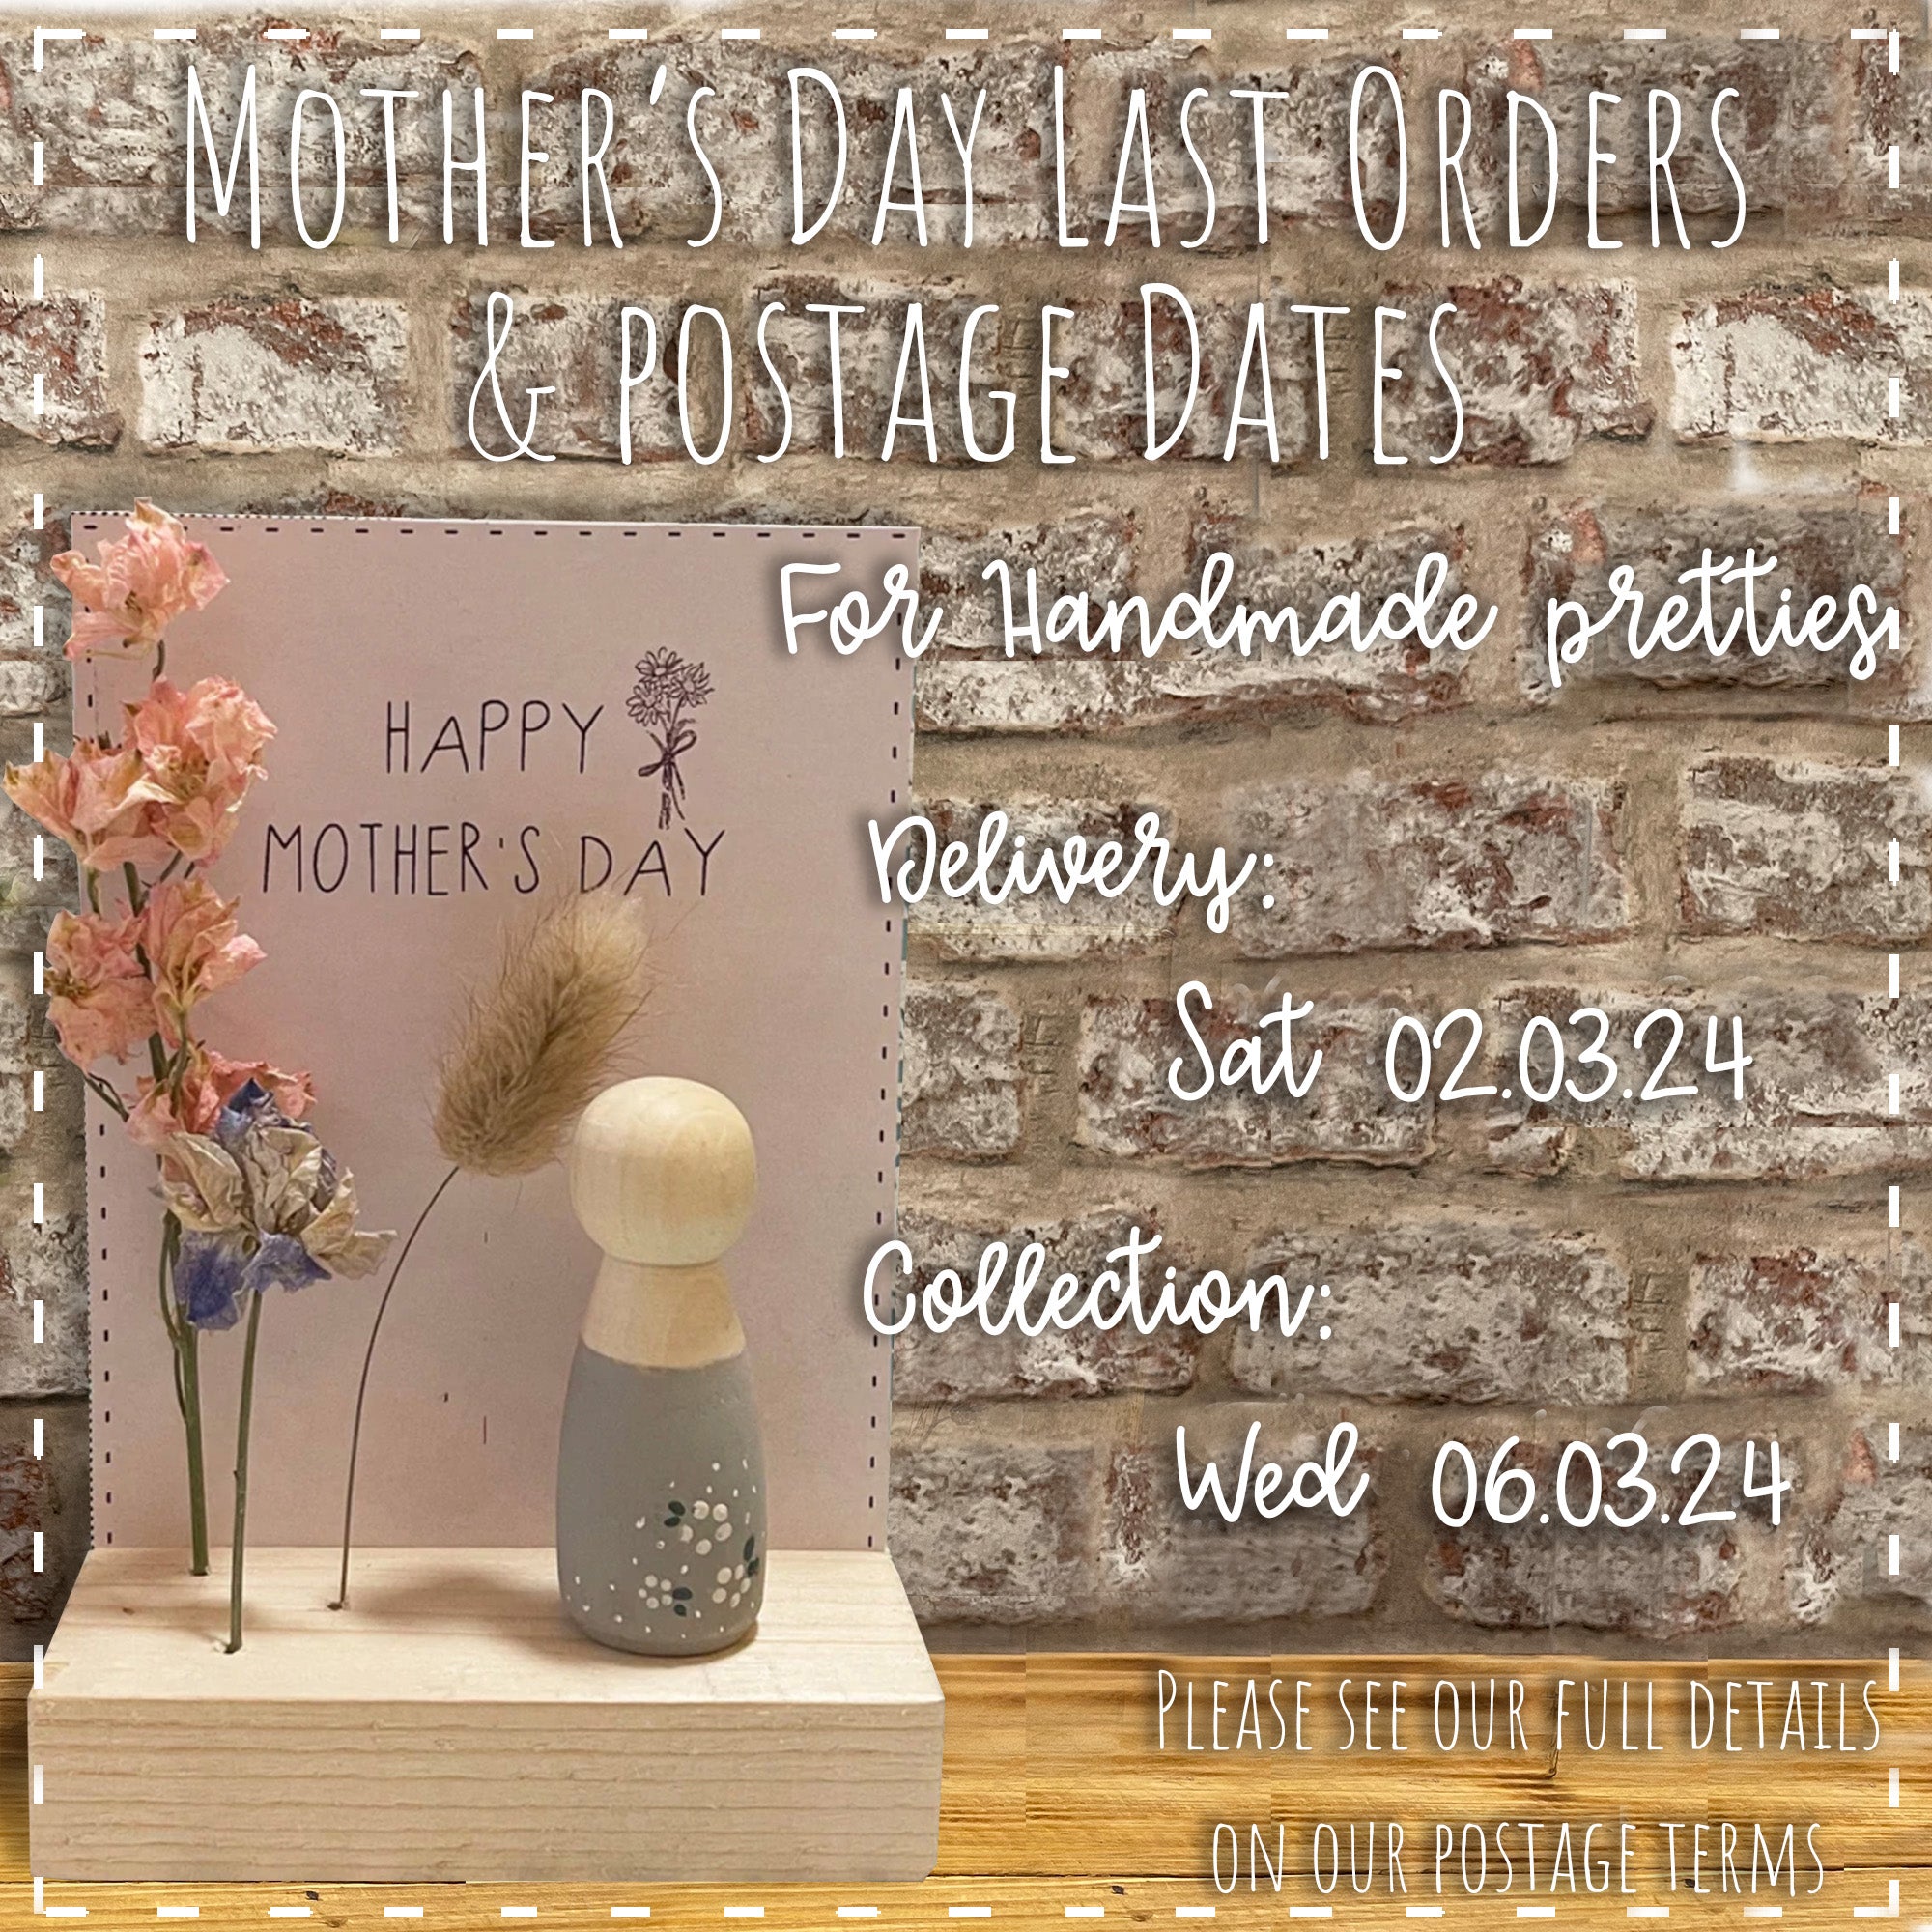 MOTHER'S DAY LAST ORDERS!...